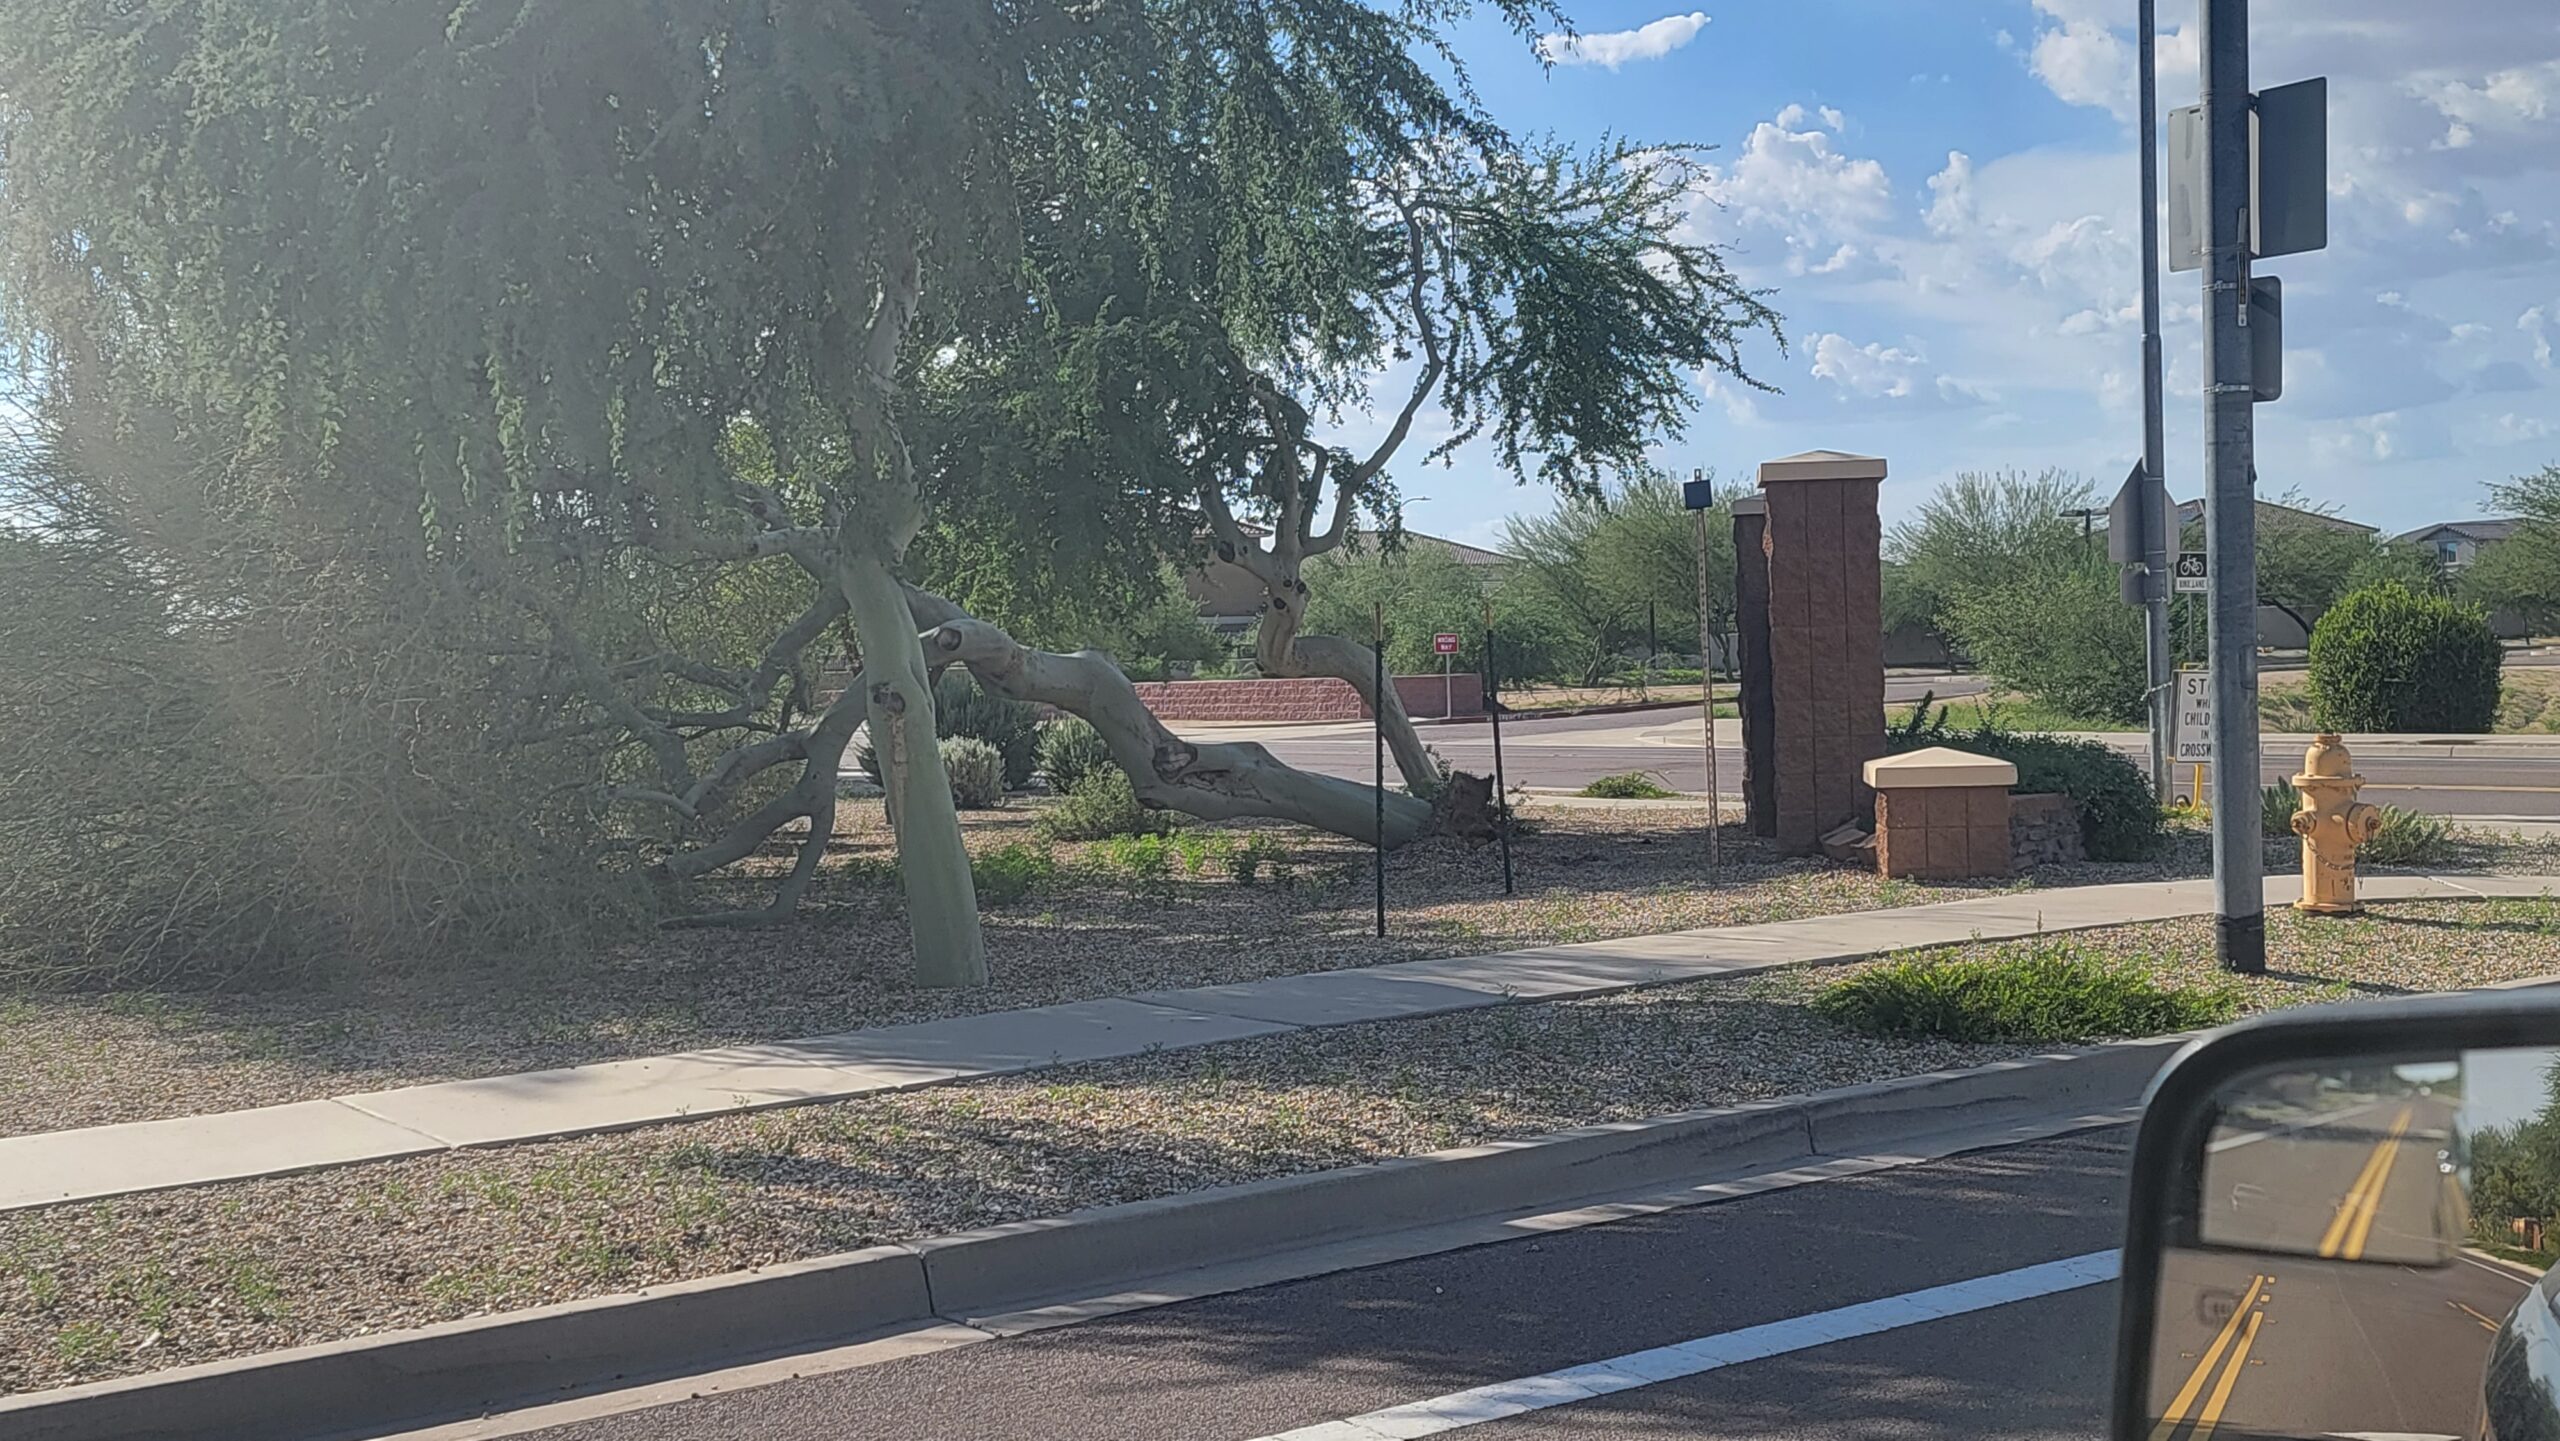 Downed Tree and Park Erosion Updates